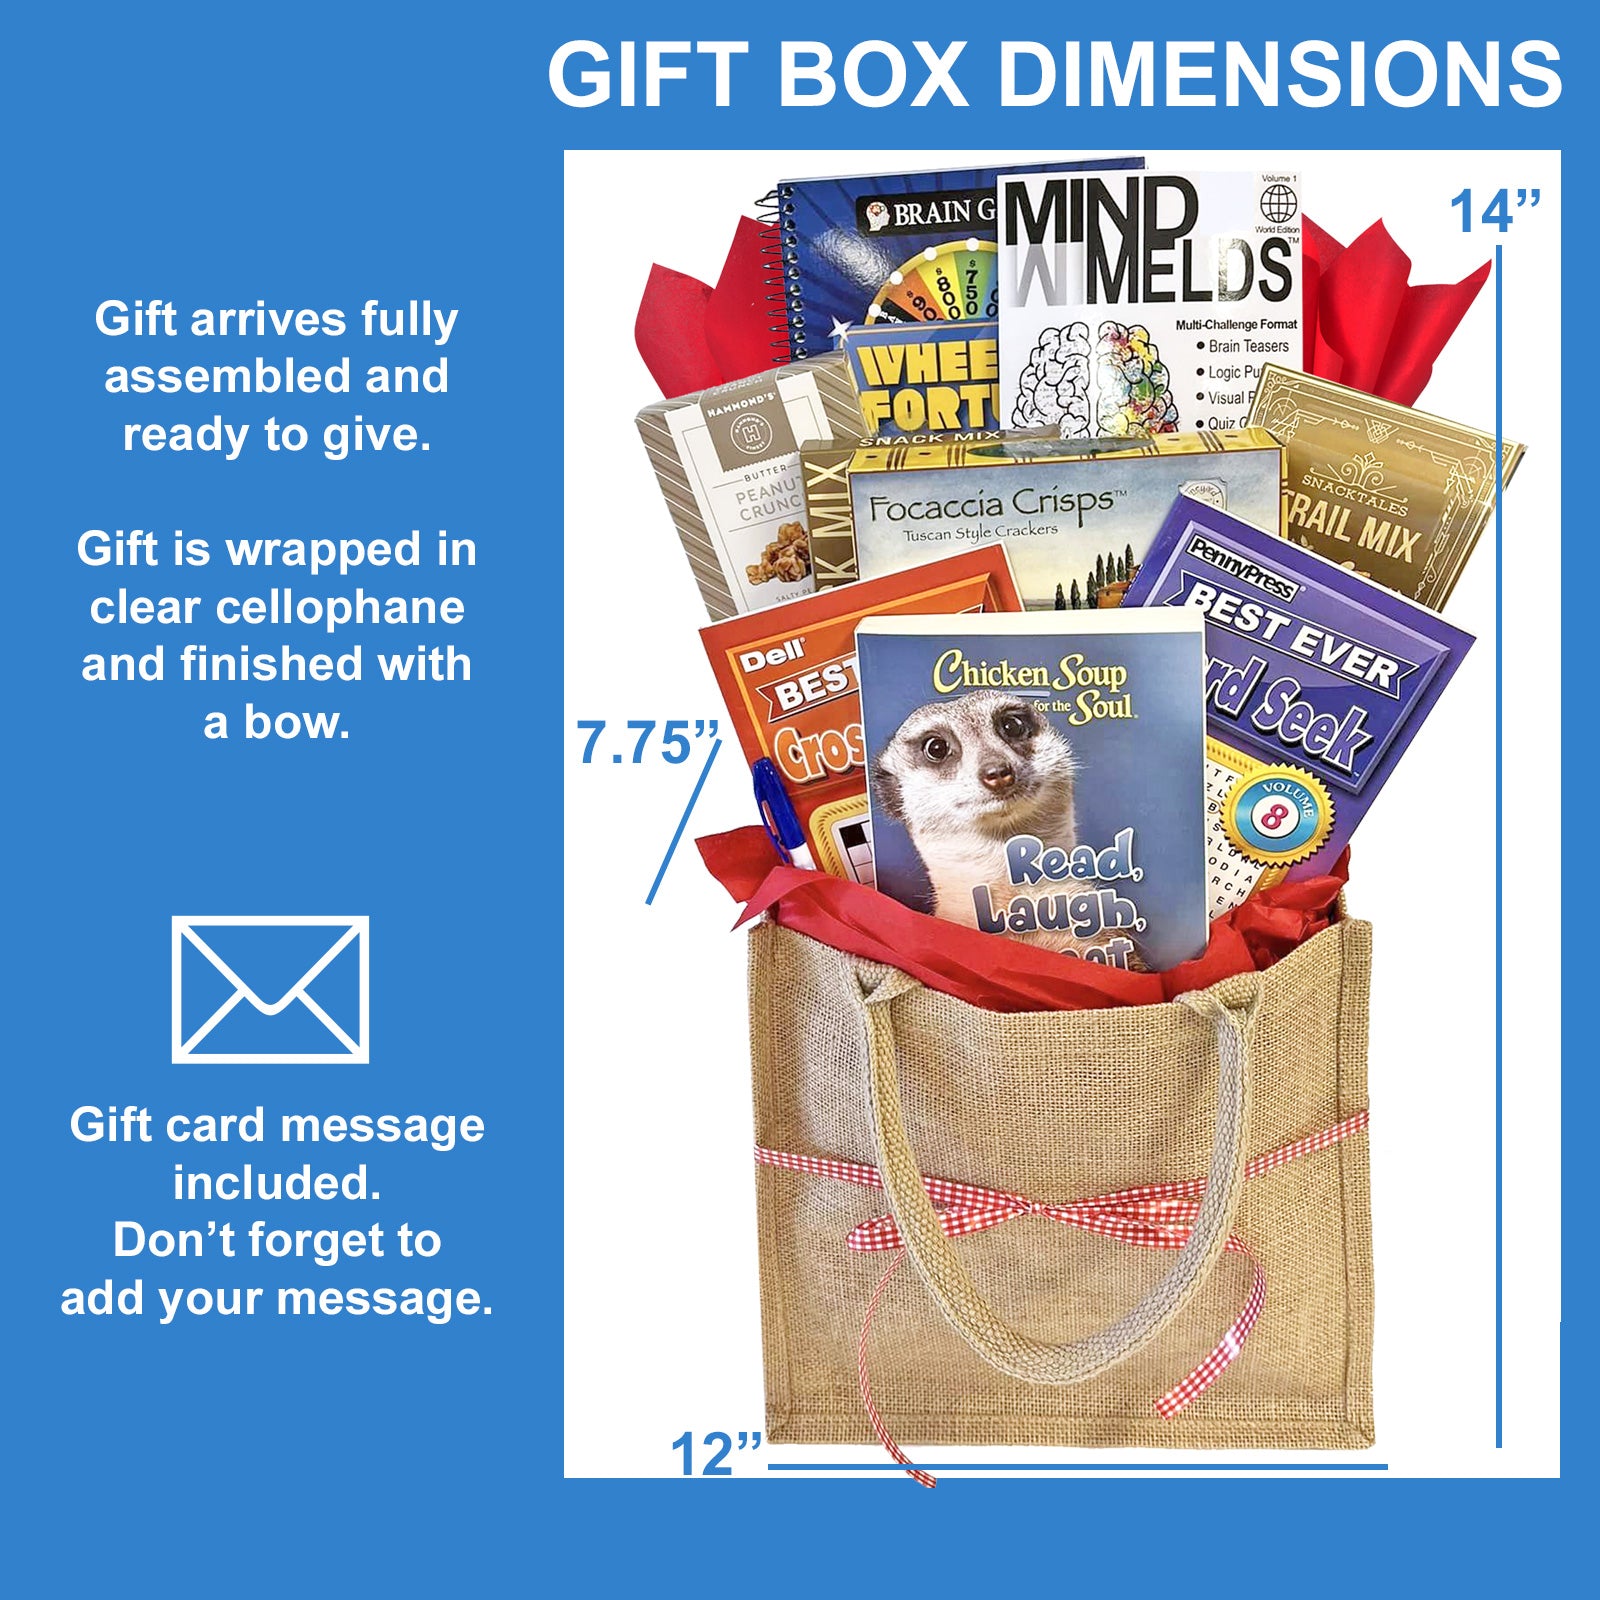 Fun and Games Get Well Gift Basket Relaxing Get-Well Gift for Men, Women, Friends and Family Gift Basket has Food and Boredom Busters for After Surgery, Recovery, Illness, Thinking of You